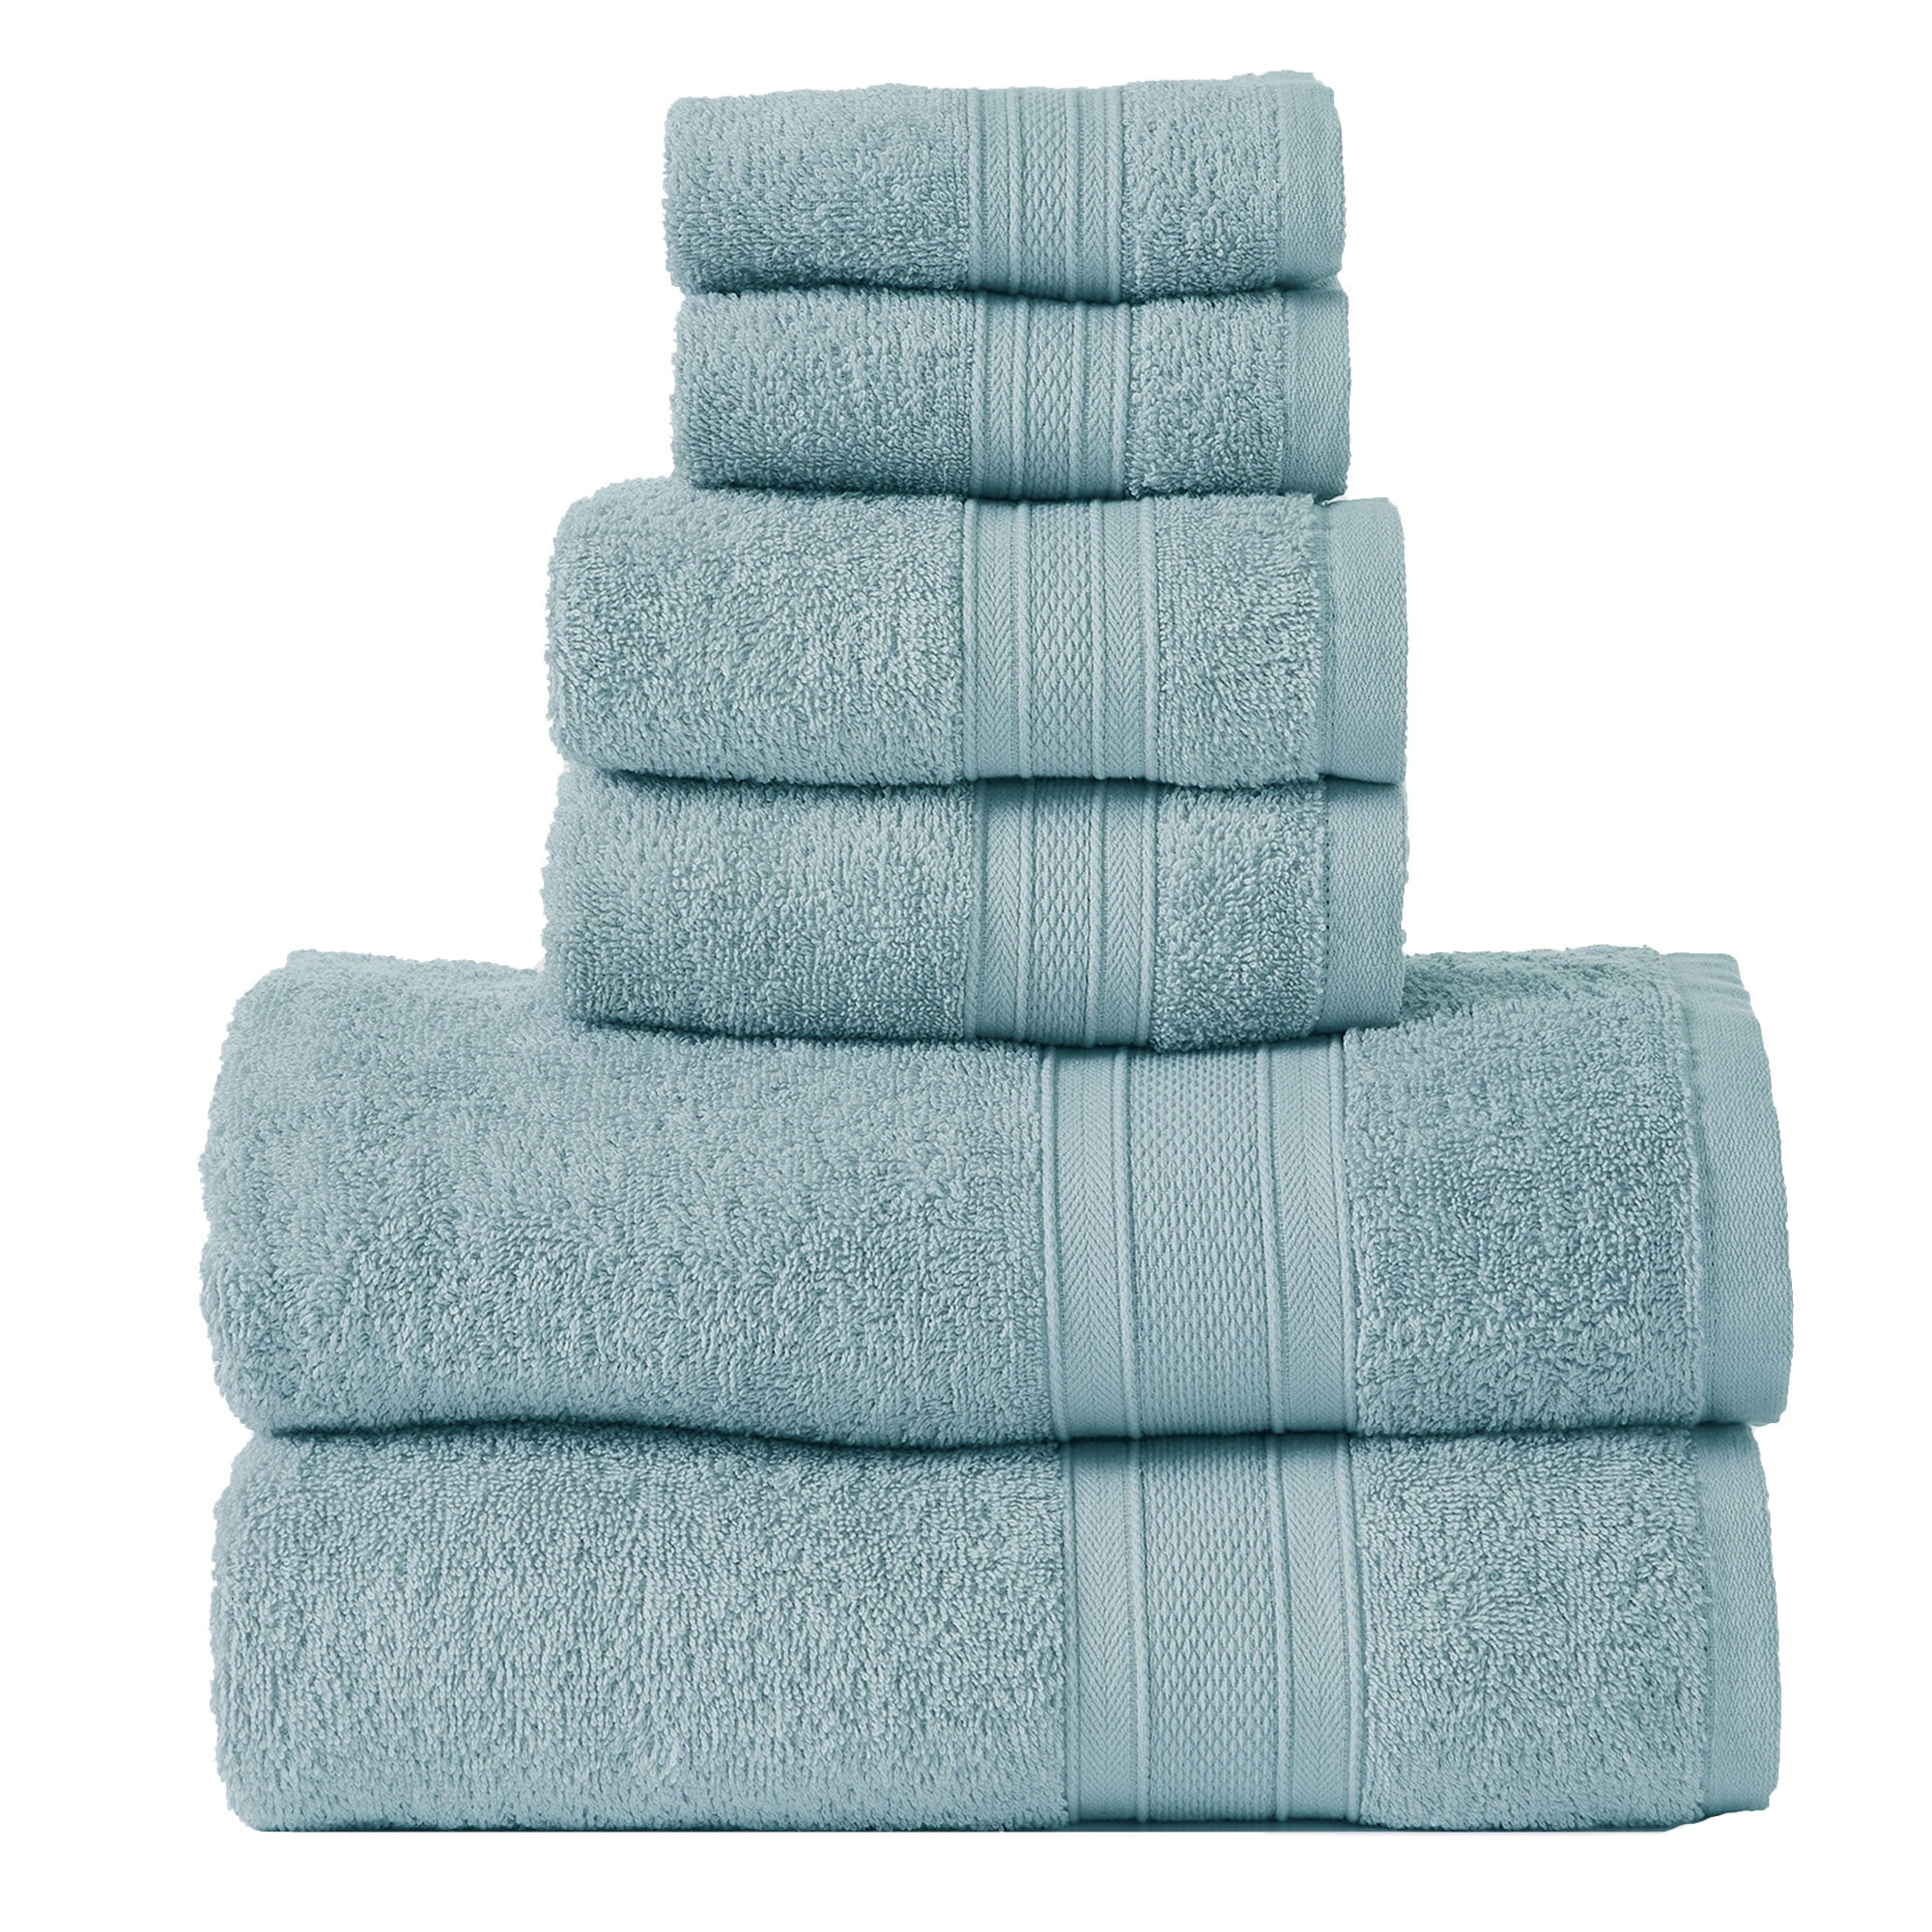 Super So Bathroom Towels TRIDENT Soft and Plush 100% Cotton Highly Absorbent 